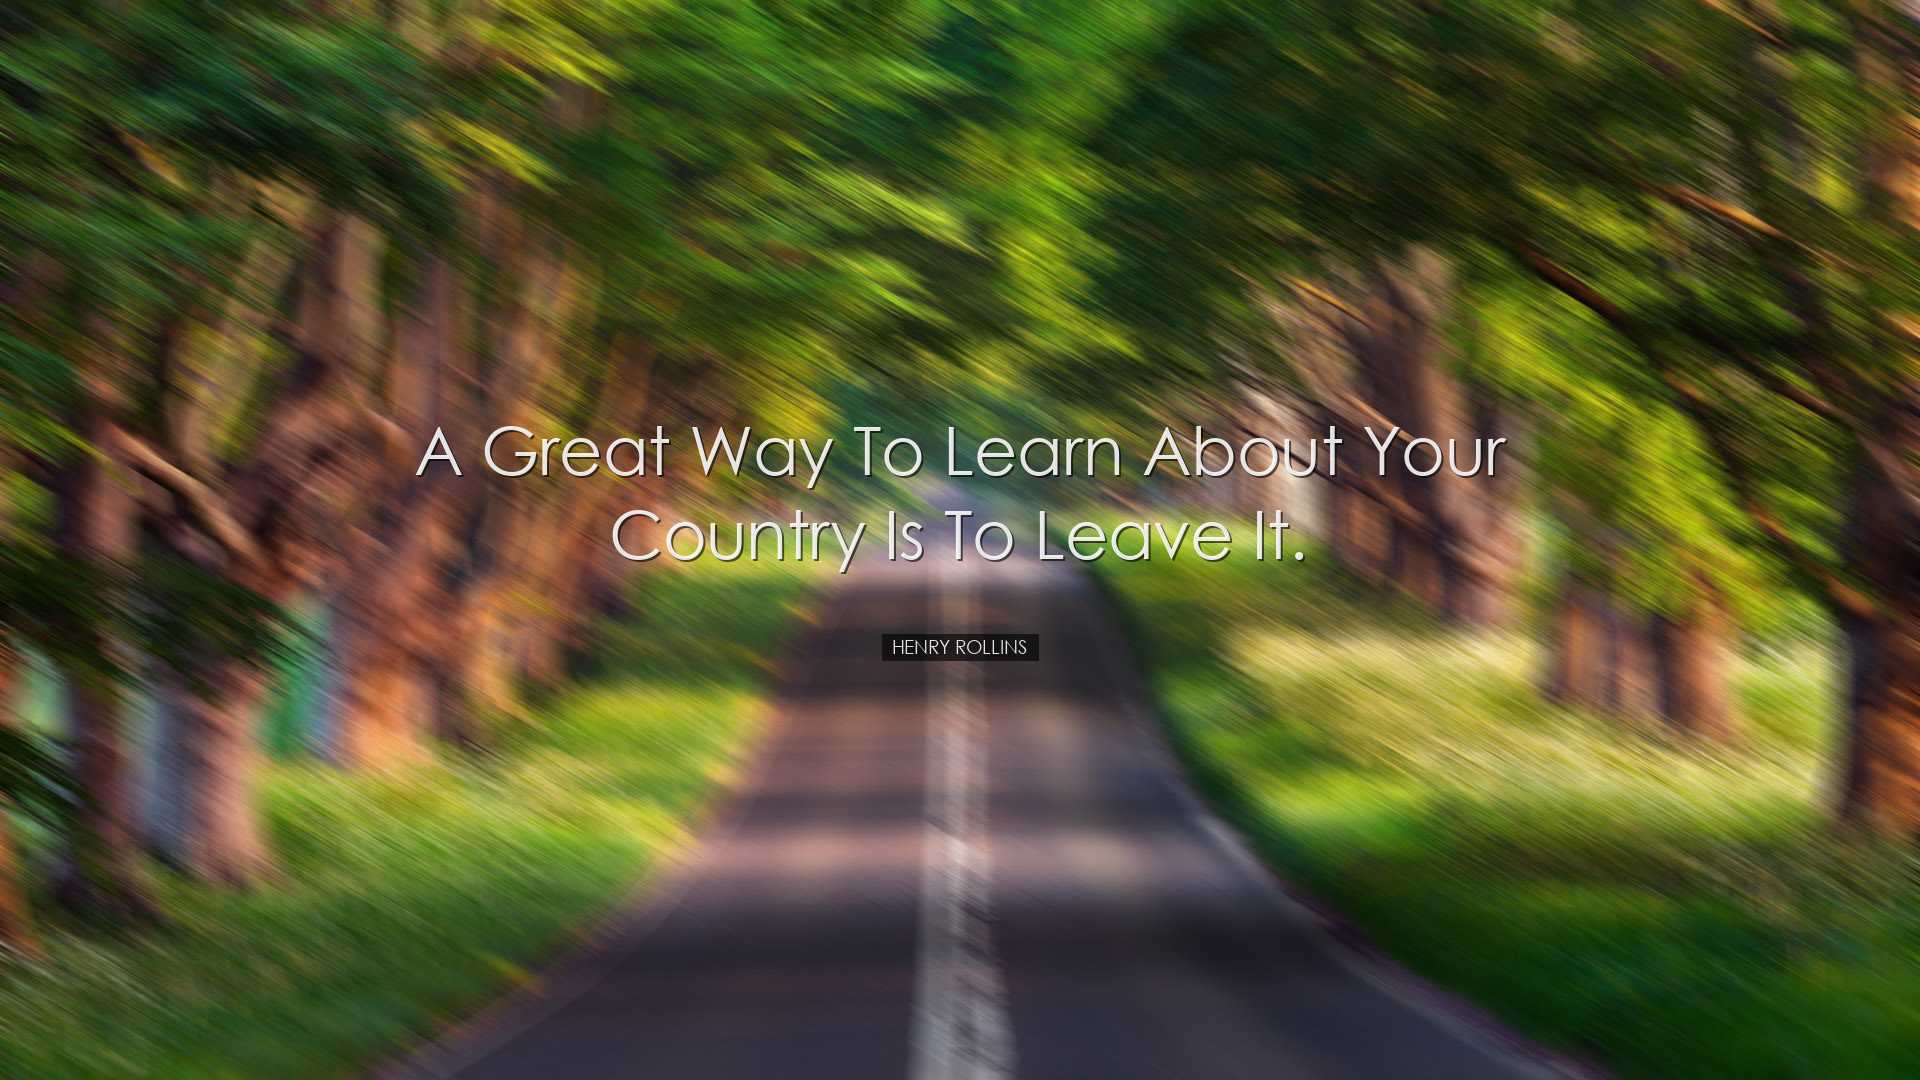 A great way to learn about your country is to leave it. - Henry Ro